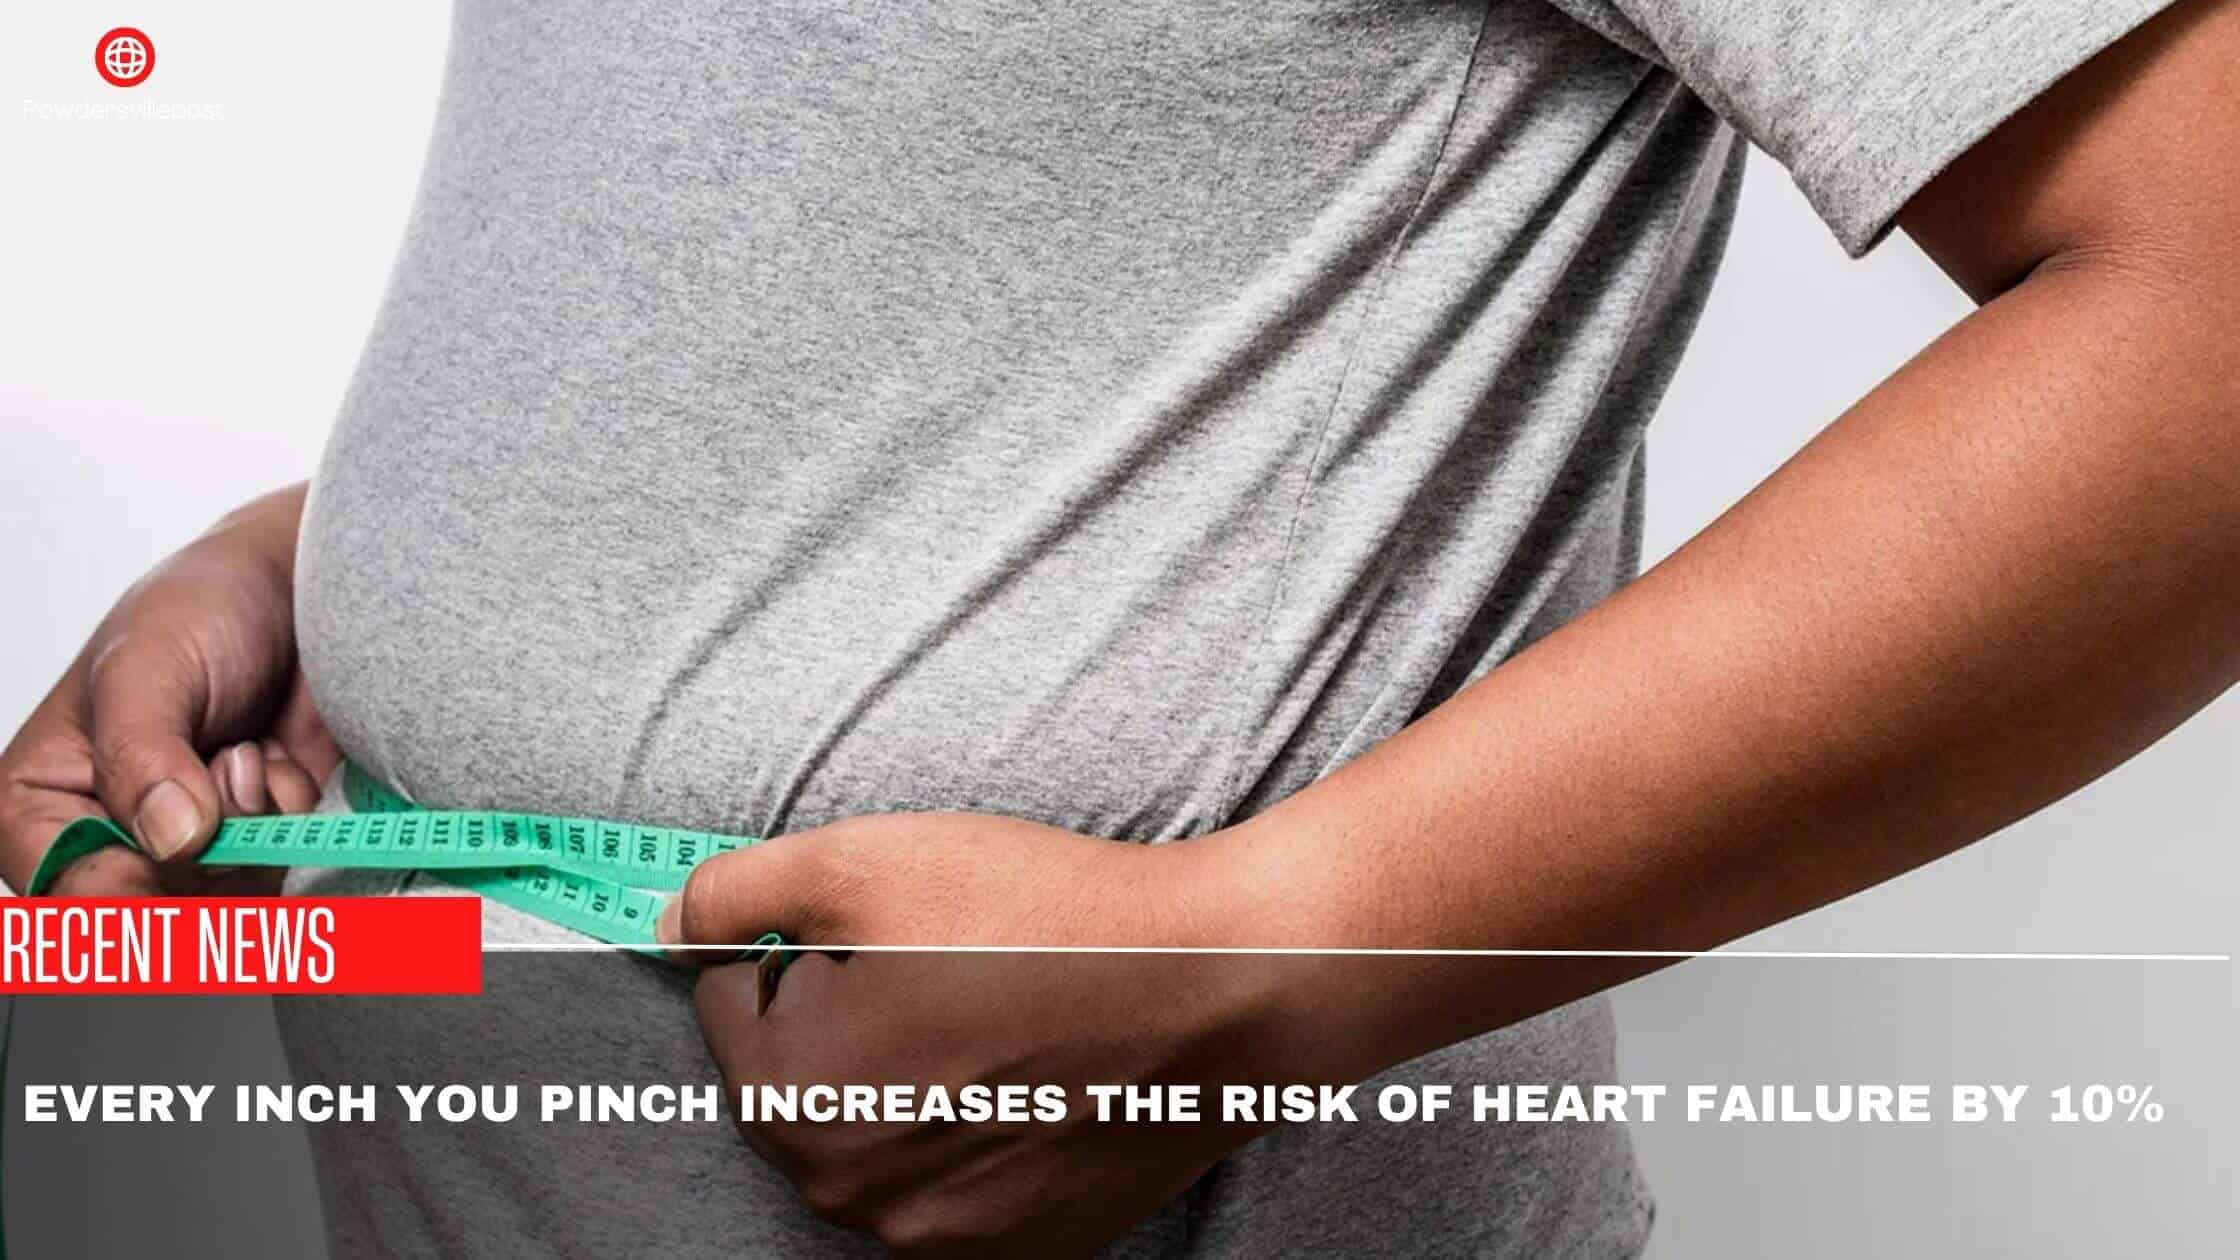 Every Inch You Pinch Increases The Risk Of Heart Failure By 10%